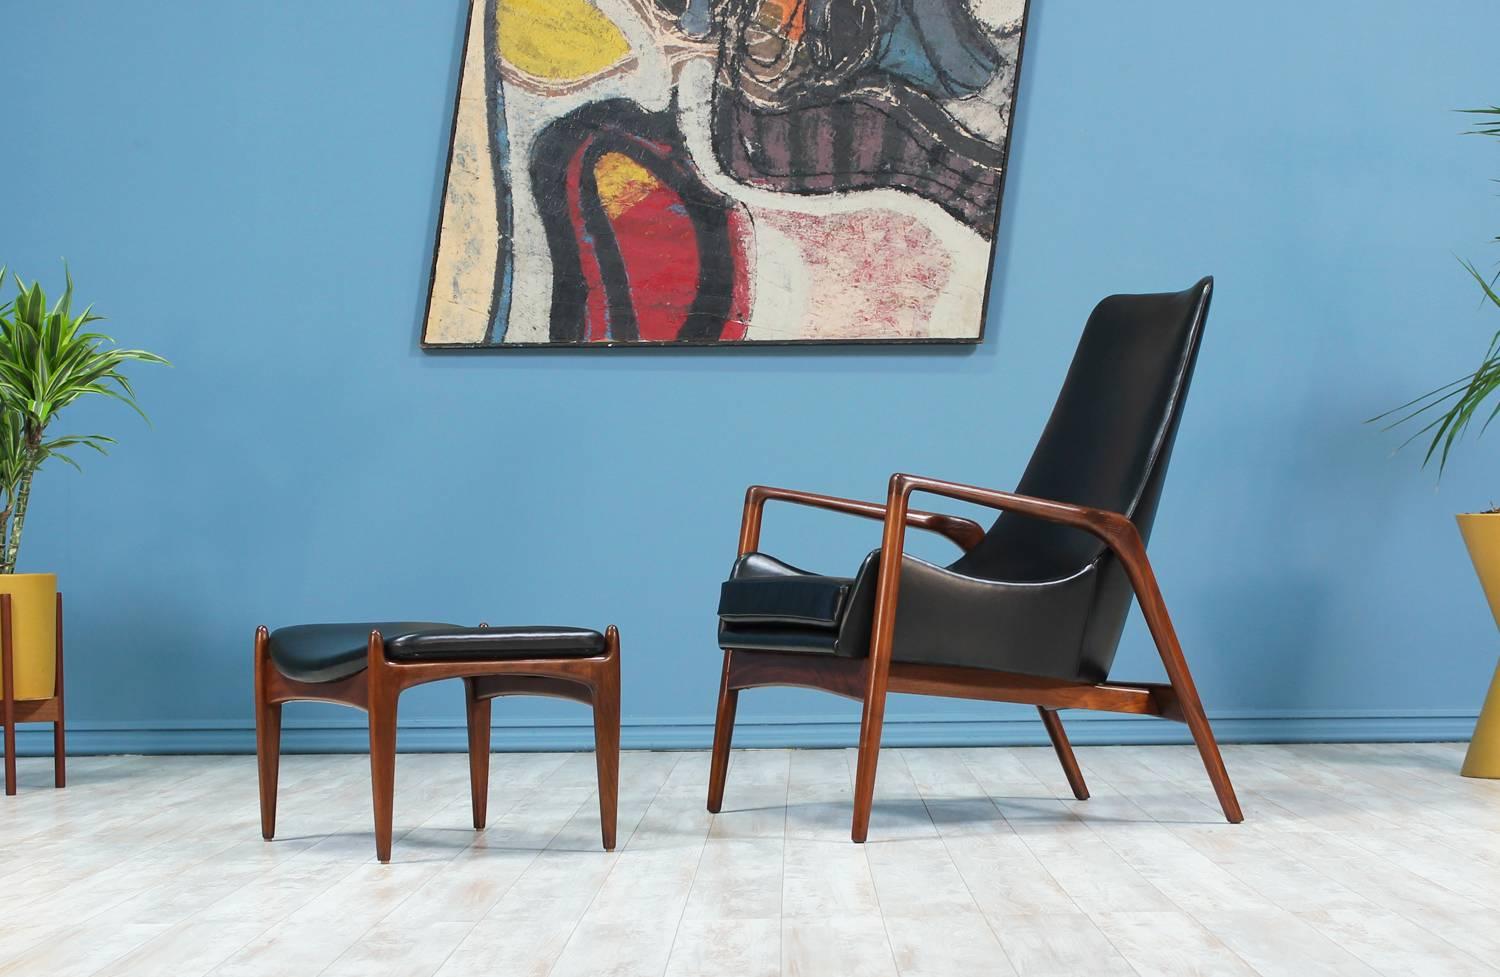 Elegant Lounge chair with ottoman designed by Ib-Kofod Larsen and manufactured by Selig in Denmark circa 1960’s. Both items feature a walnut-stained beech wood sculptural frame upholstered in high quality full grain black leather. This classy high